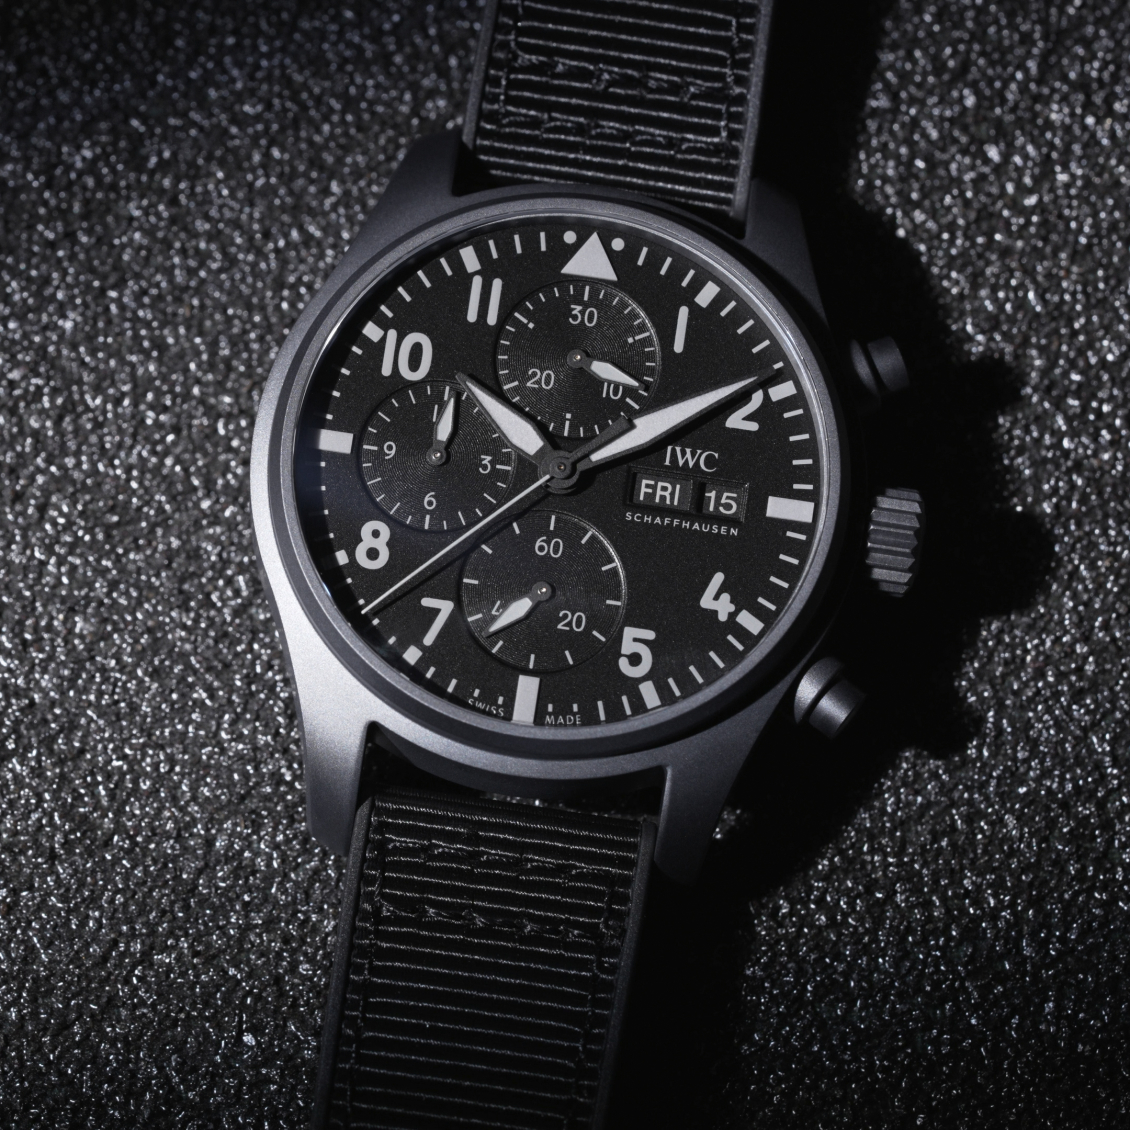 The Story of IWC, Top Gun, and the Ceratanium Pilot Watch